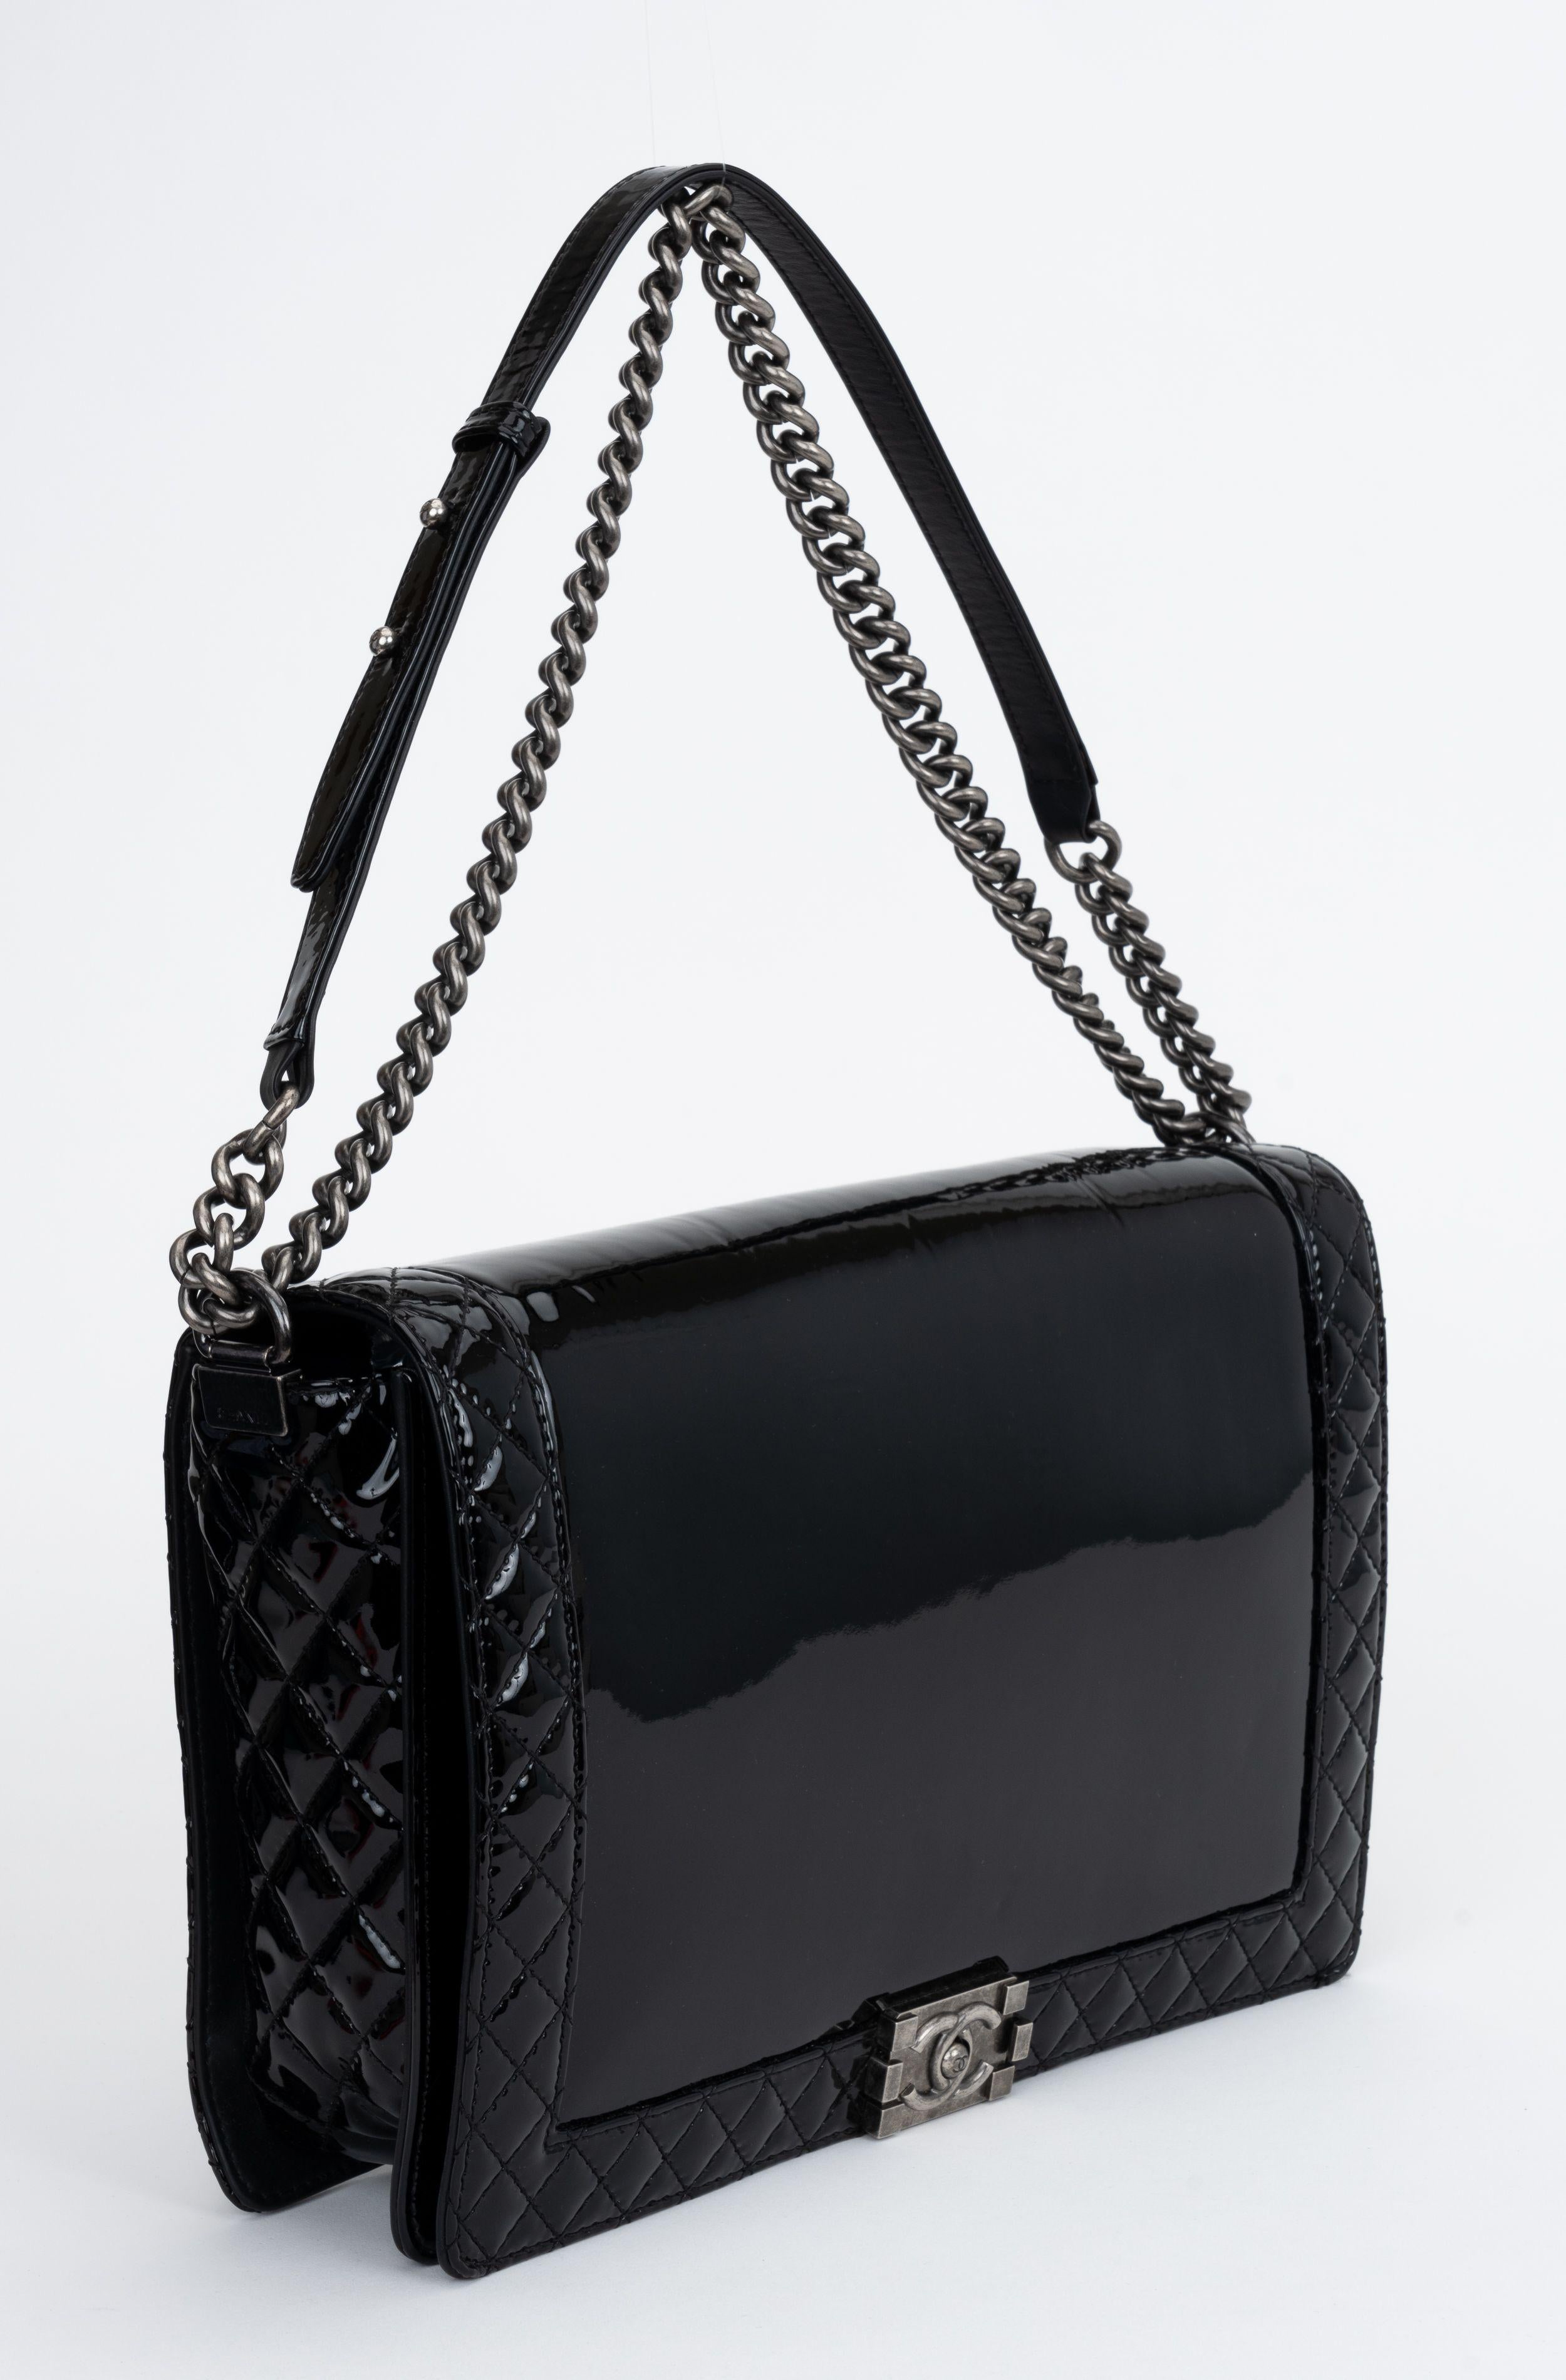 Chanel Black Patent Maxi Boy Bag In New Condition For Sale In West Hollywood, CA